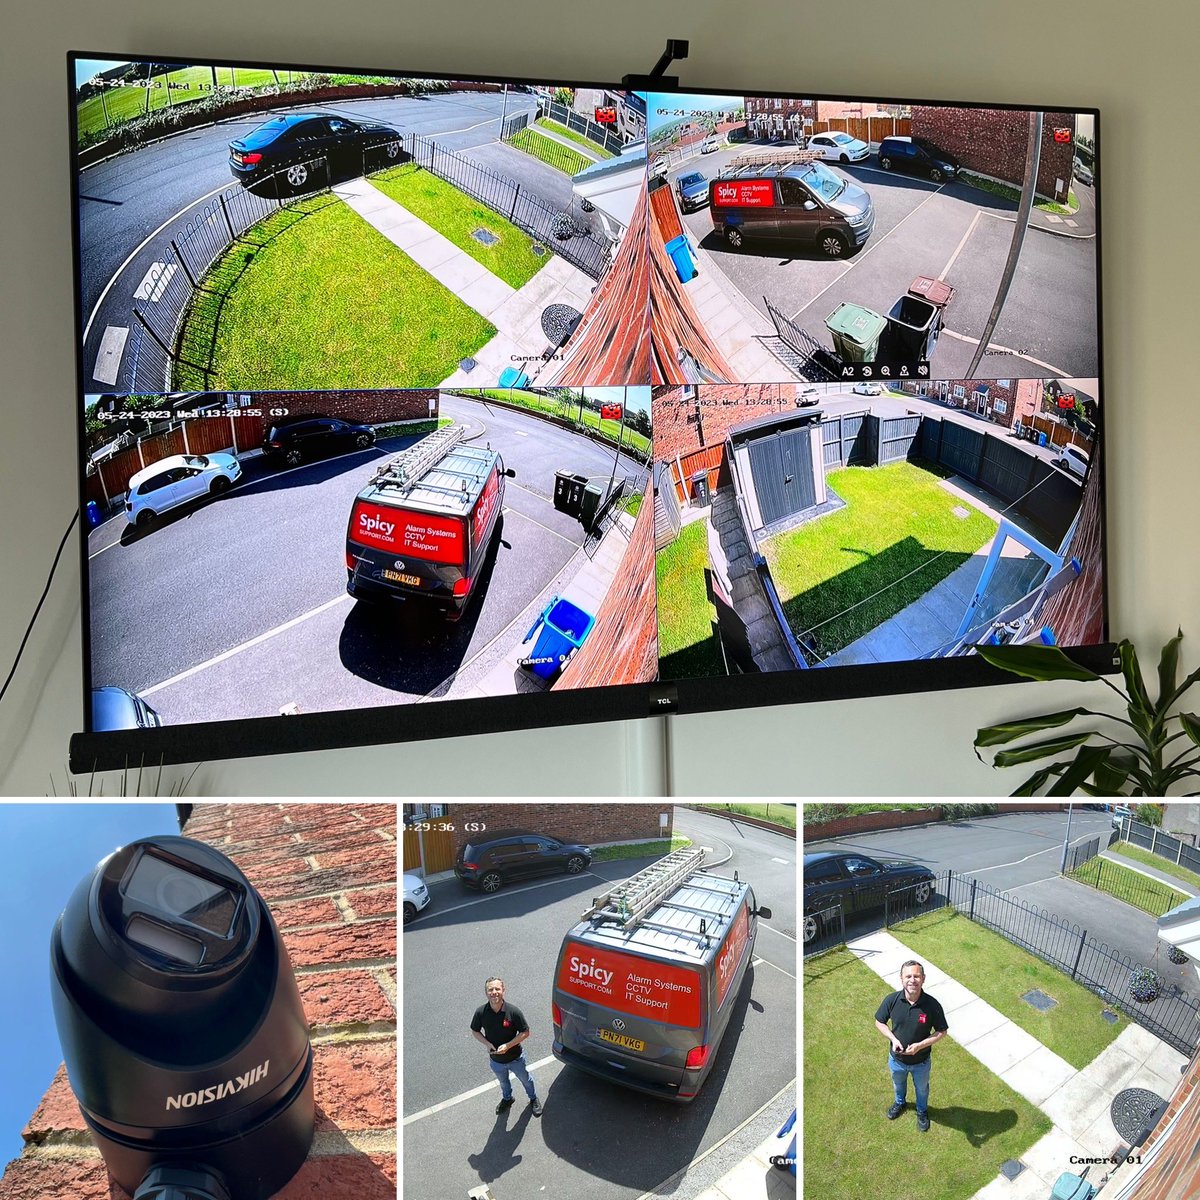 CCTV system installed in Oldham. Message us if you want a quote for your business or home.

#alarmsystem #hikvision #cctv #spicysupport #doorentrysystem #colorvu #itsupport #itsupportservices #itsupportspecialist #wirelessalarm #ajax #securitylight #videodoorbell